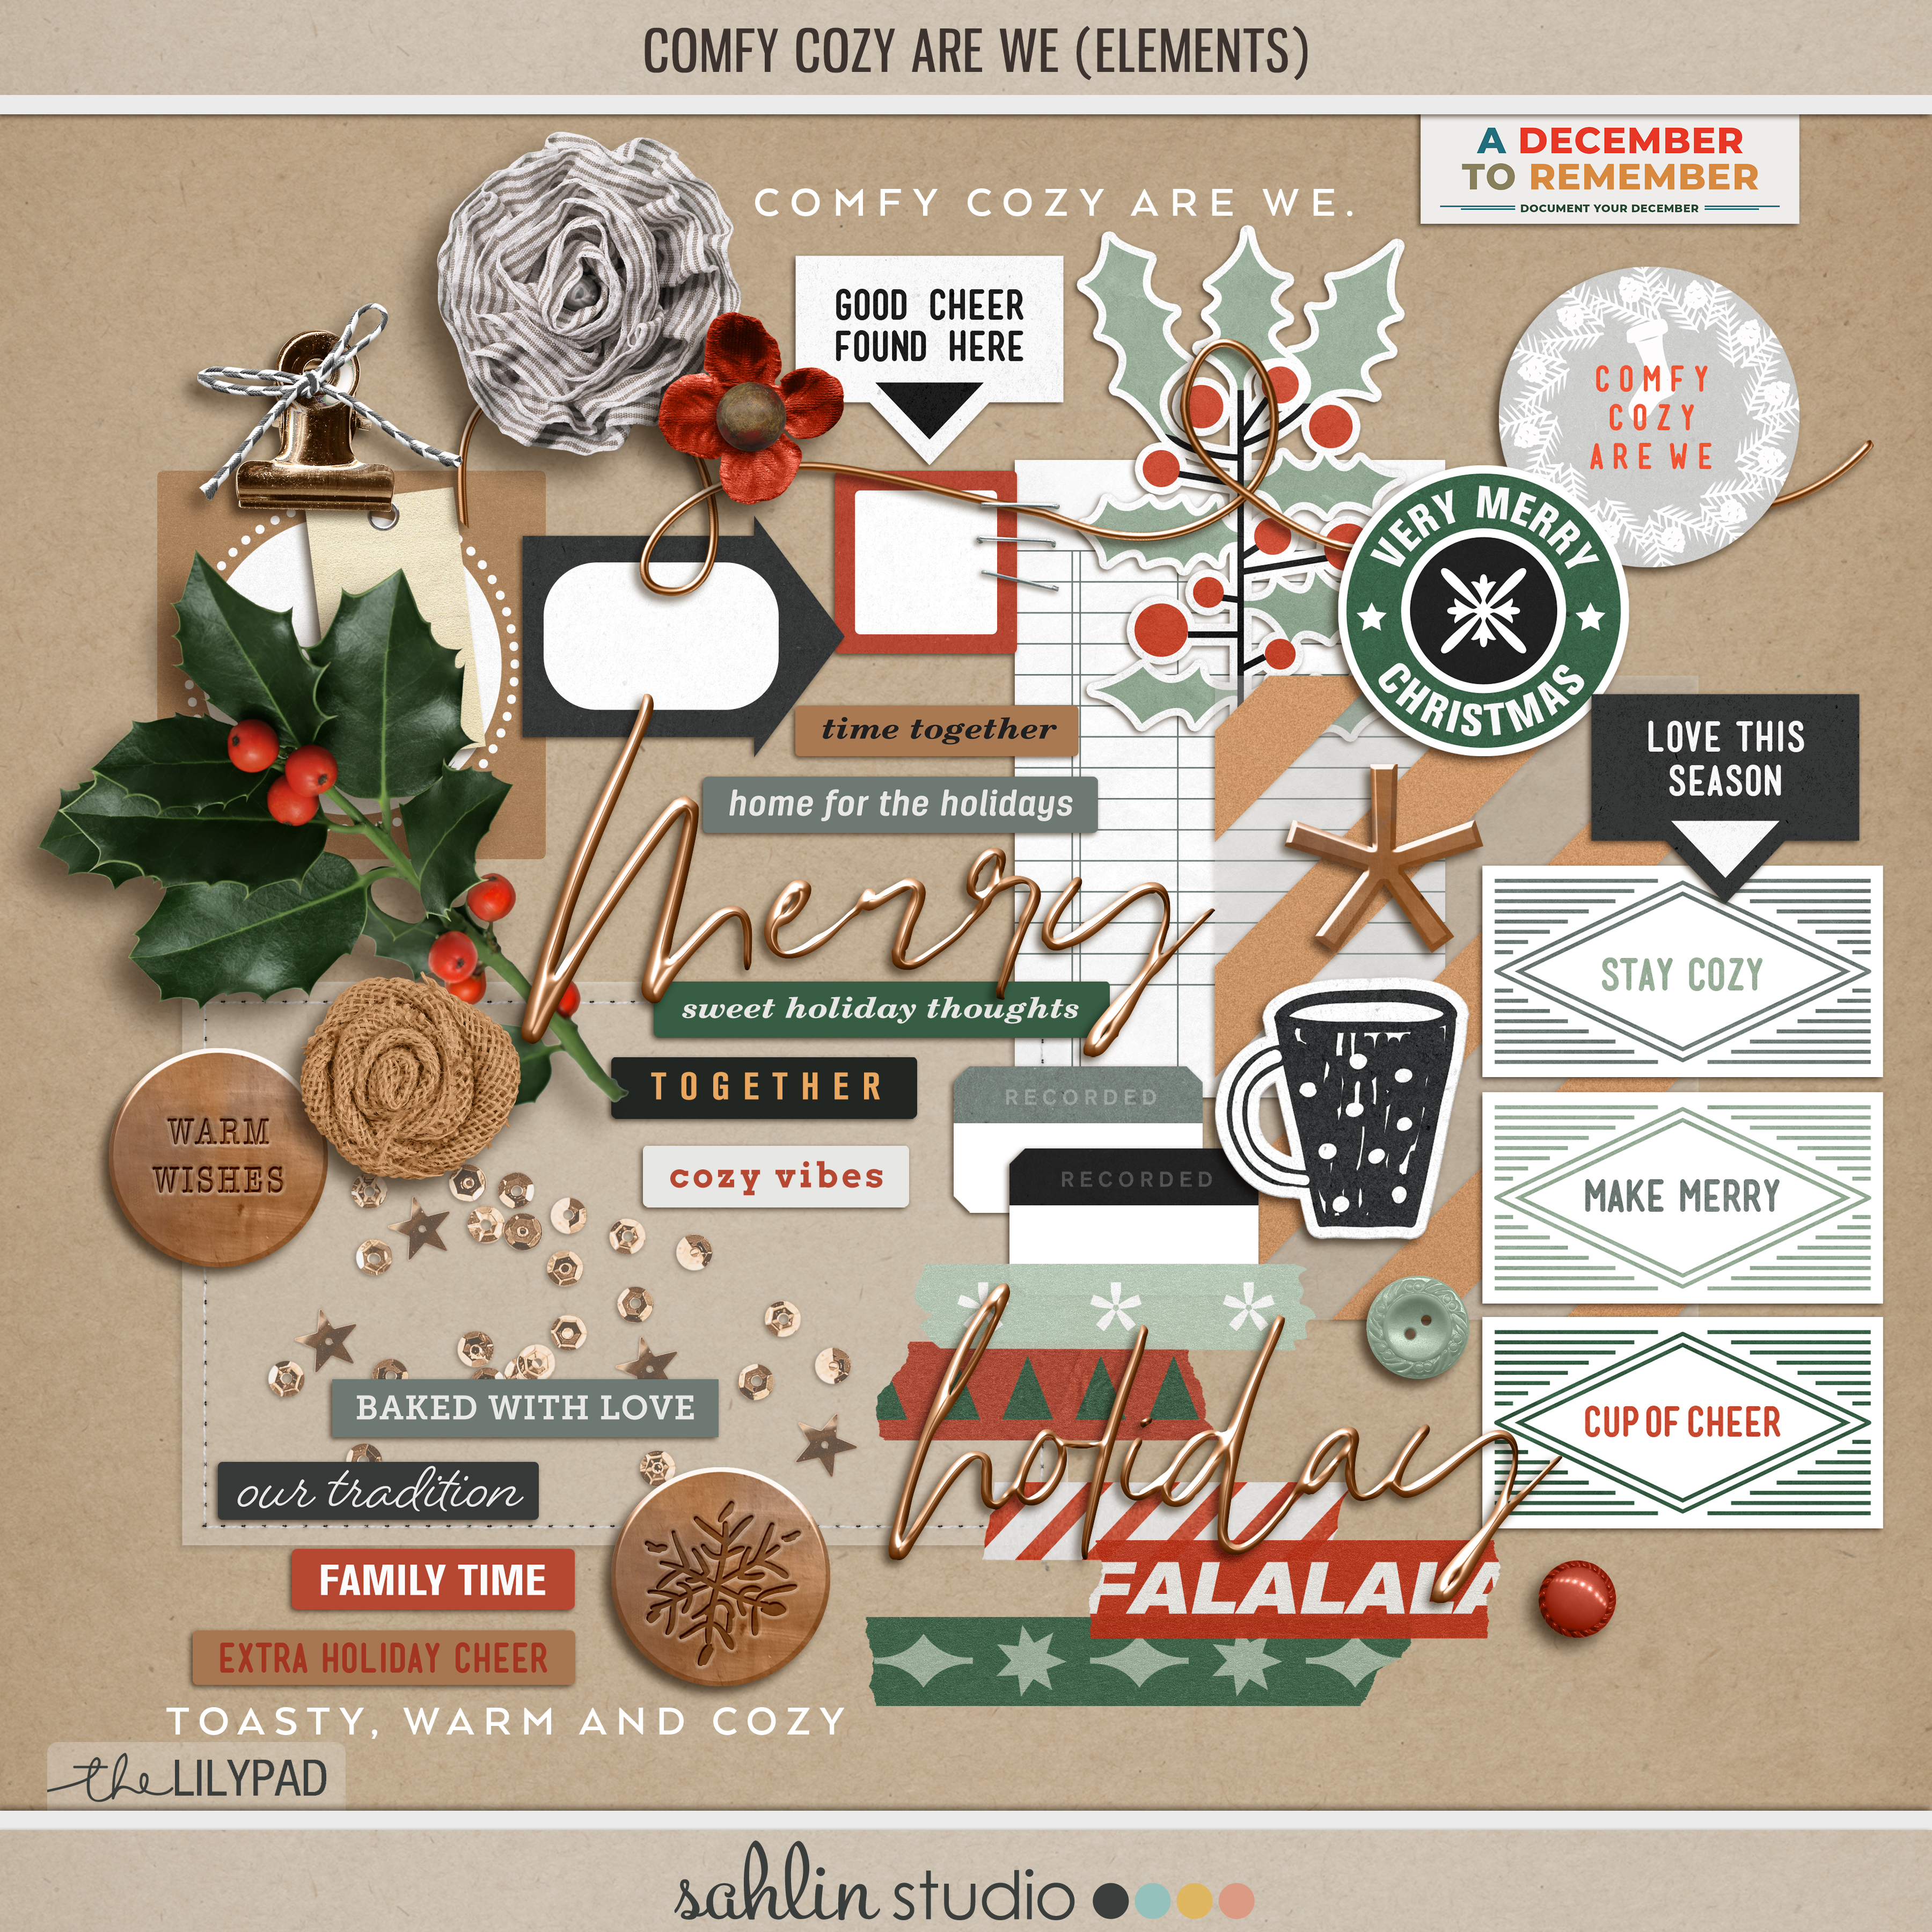 Comfy Cozy Are We (Elements) by Sahlin Studio - Perfect for scrapbooking your December Daily, Document Your December, Project Life and Christmas albums!!